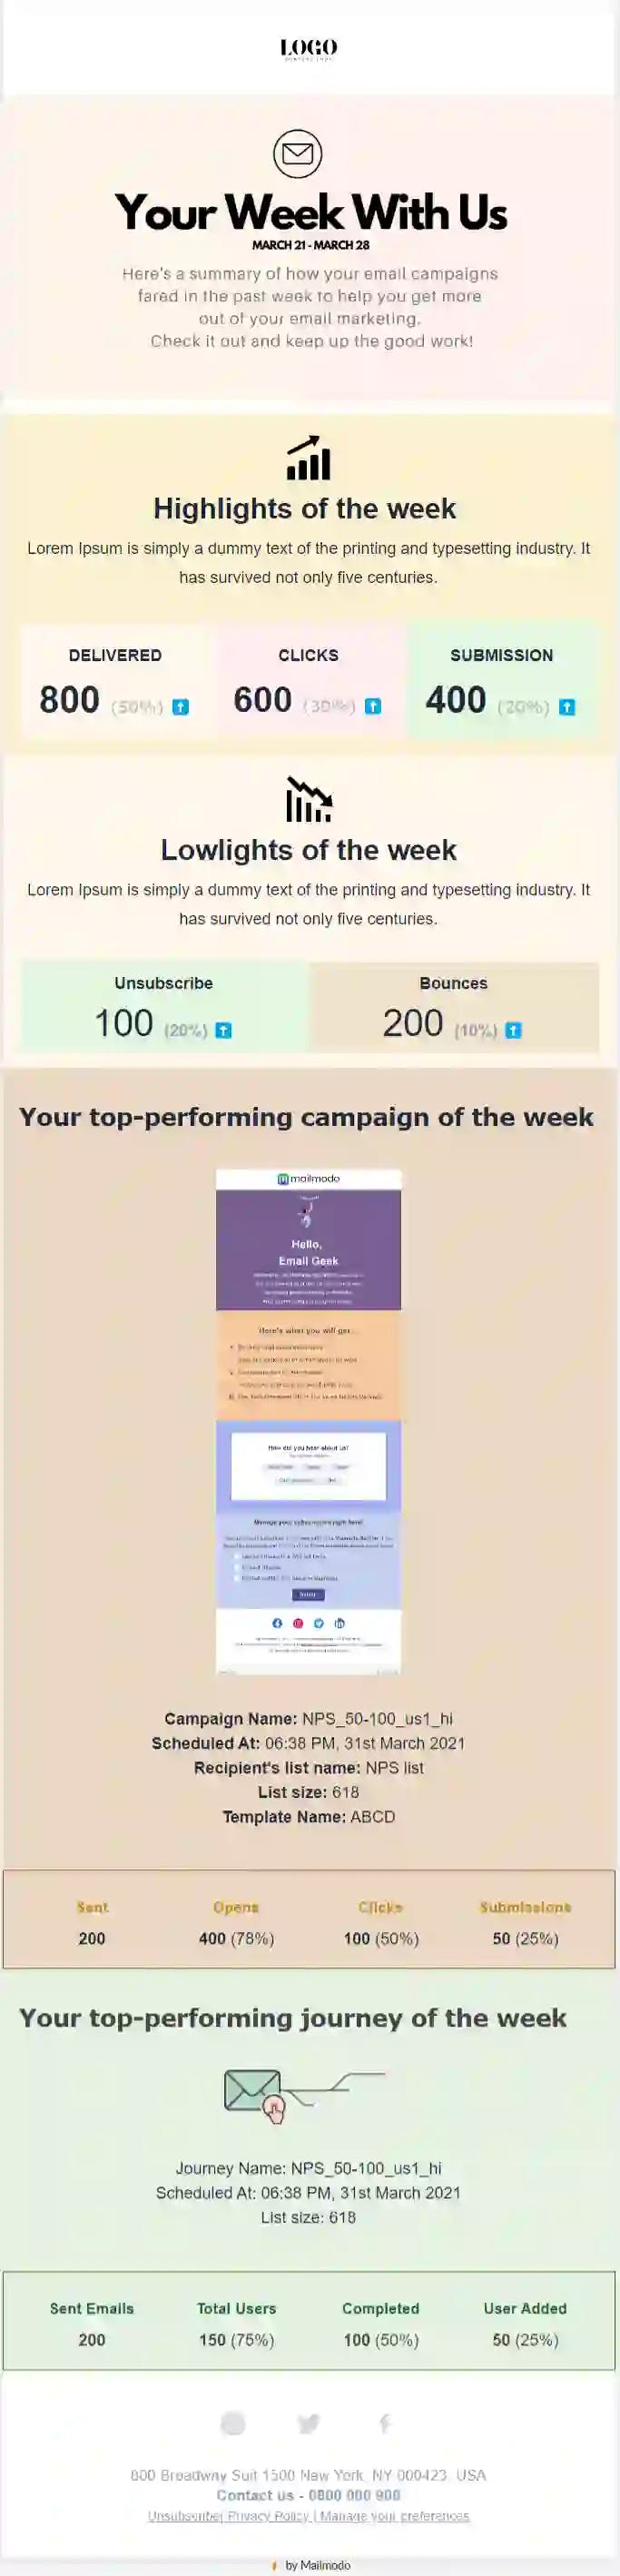 Weekly Wrap-Up Email Template